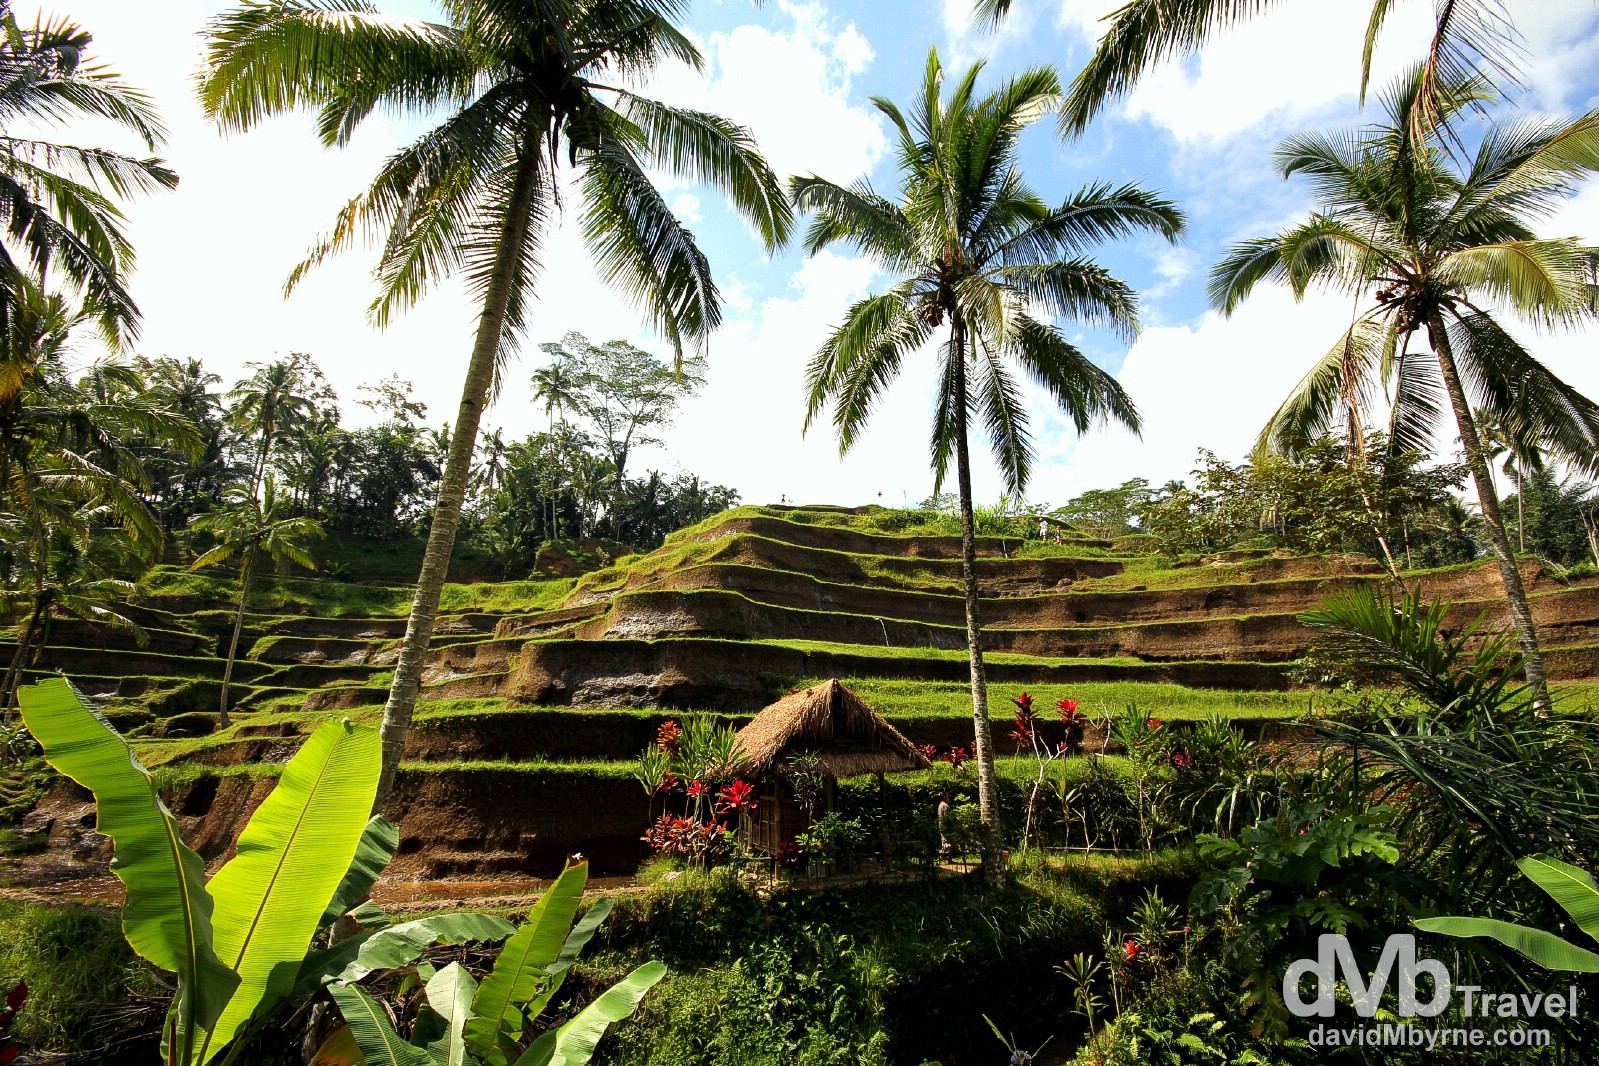 Stepped rice terraces in Ceking, Bali, Indonesia. June 19th 2012.